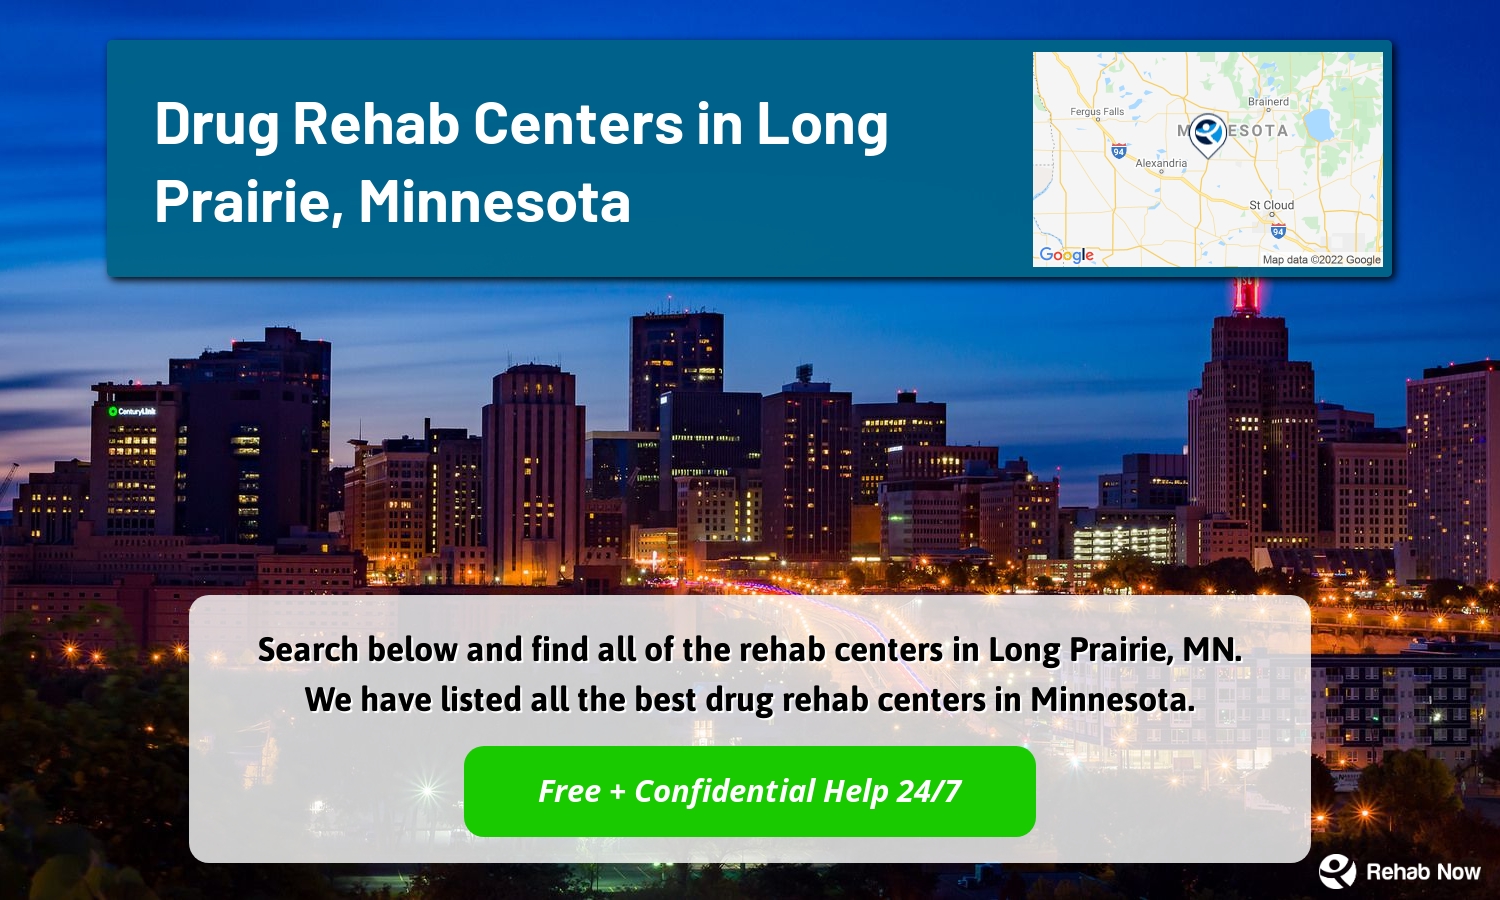 Search below and find all of the rehab centers in Long Prairie, MN. We have listed all the best drug rehab centers in Minnesota.